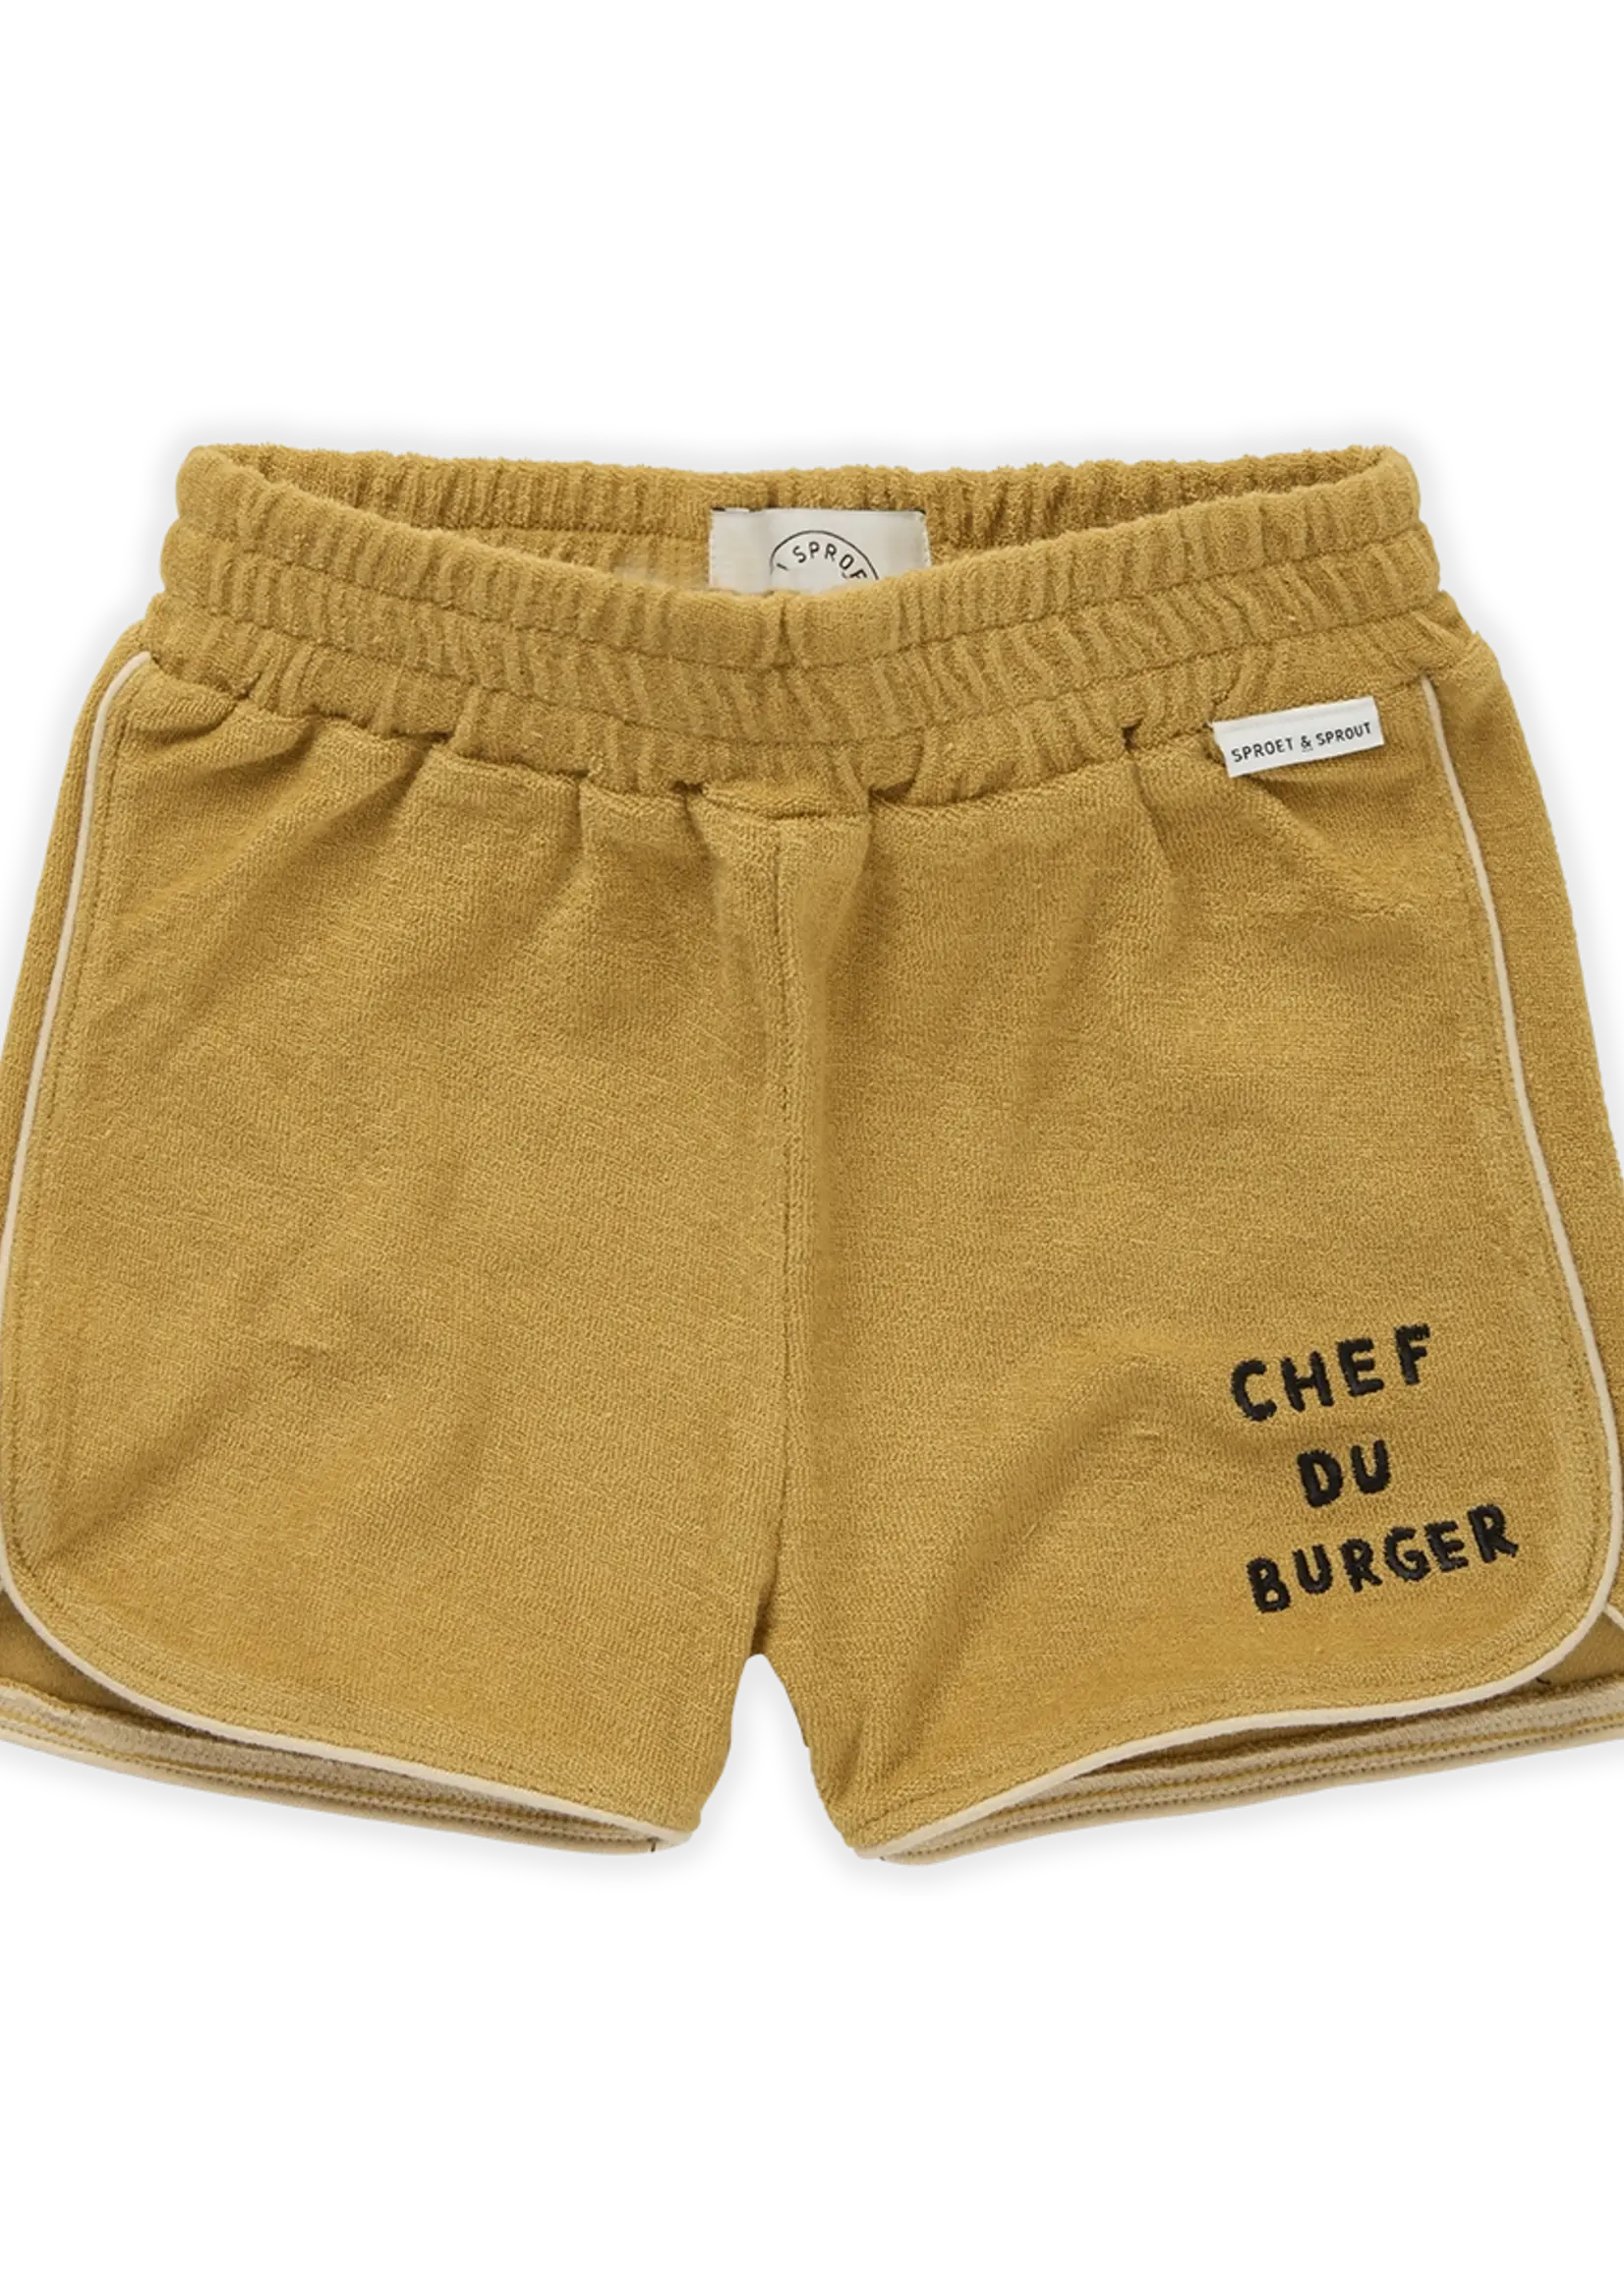 Sproet en Sprout Terry short chef du burger honey yellow - Sproet & Sprout